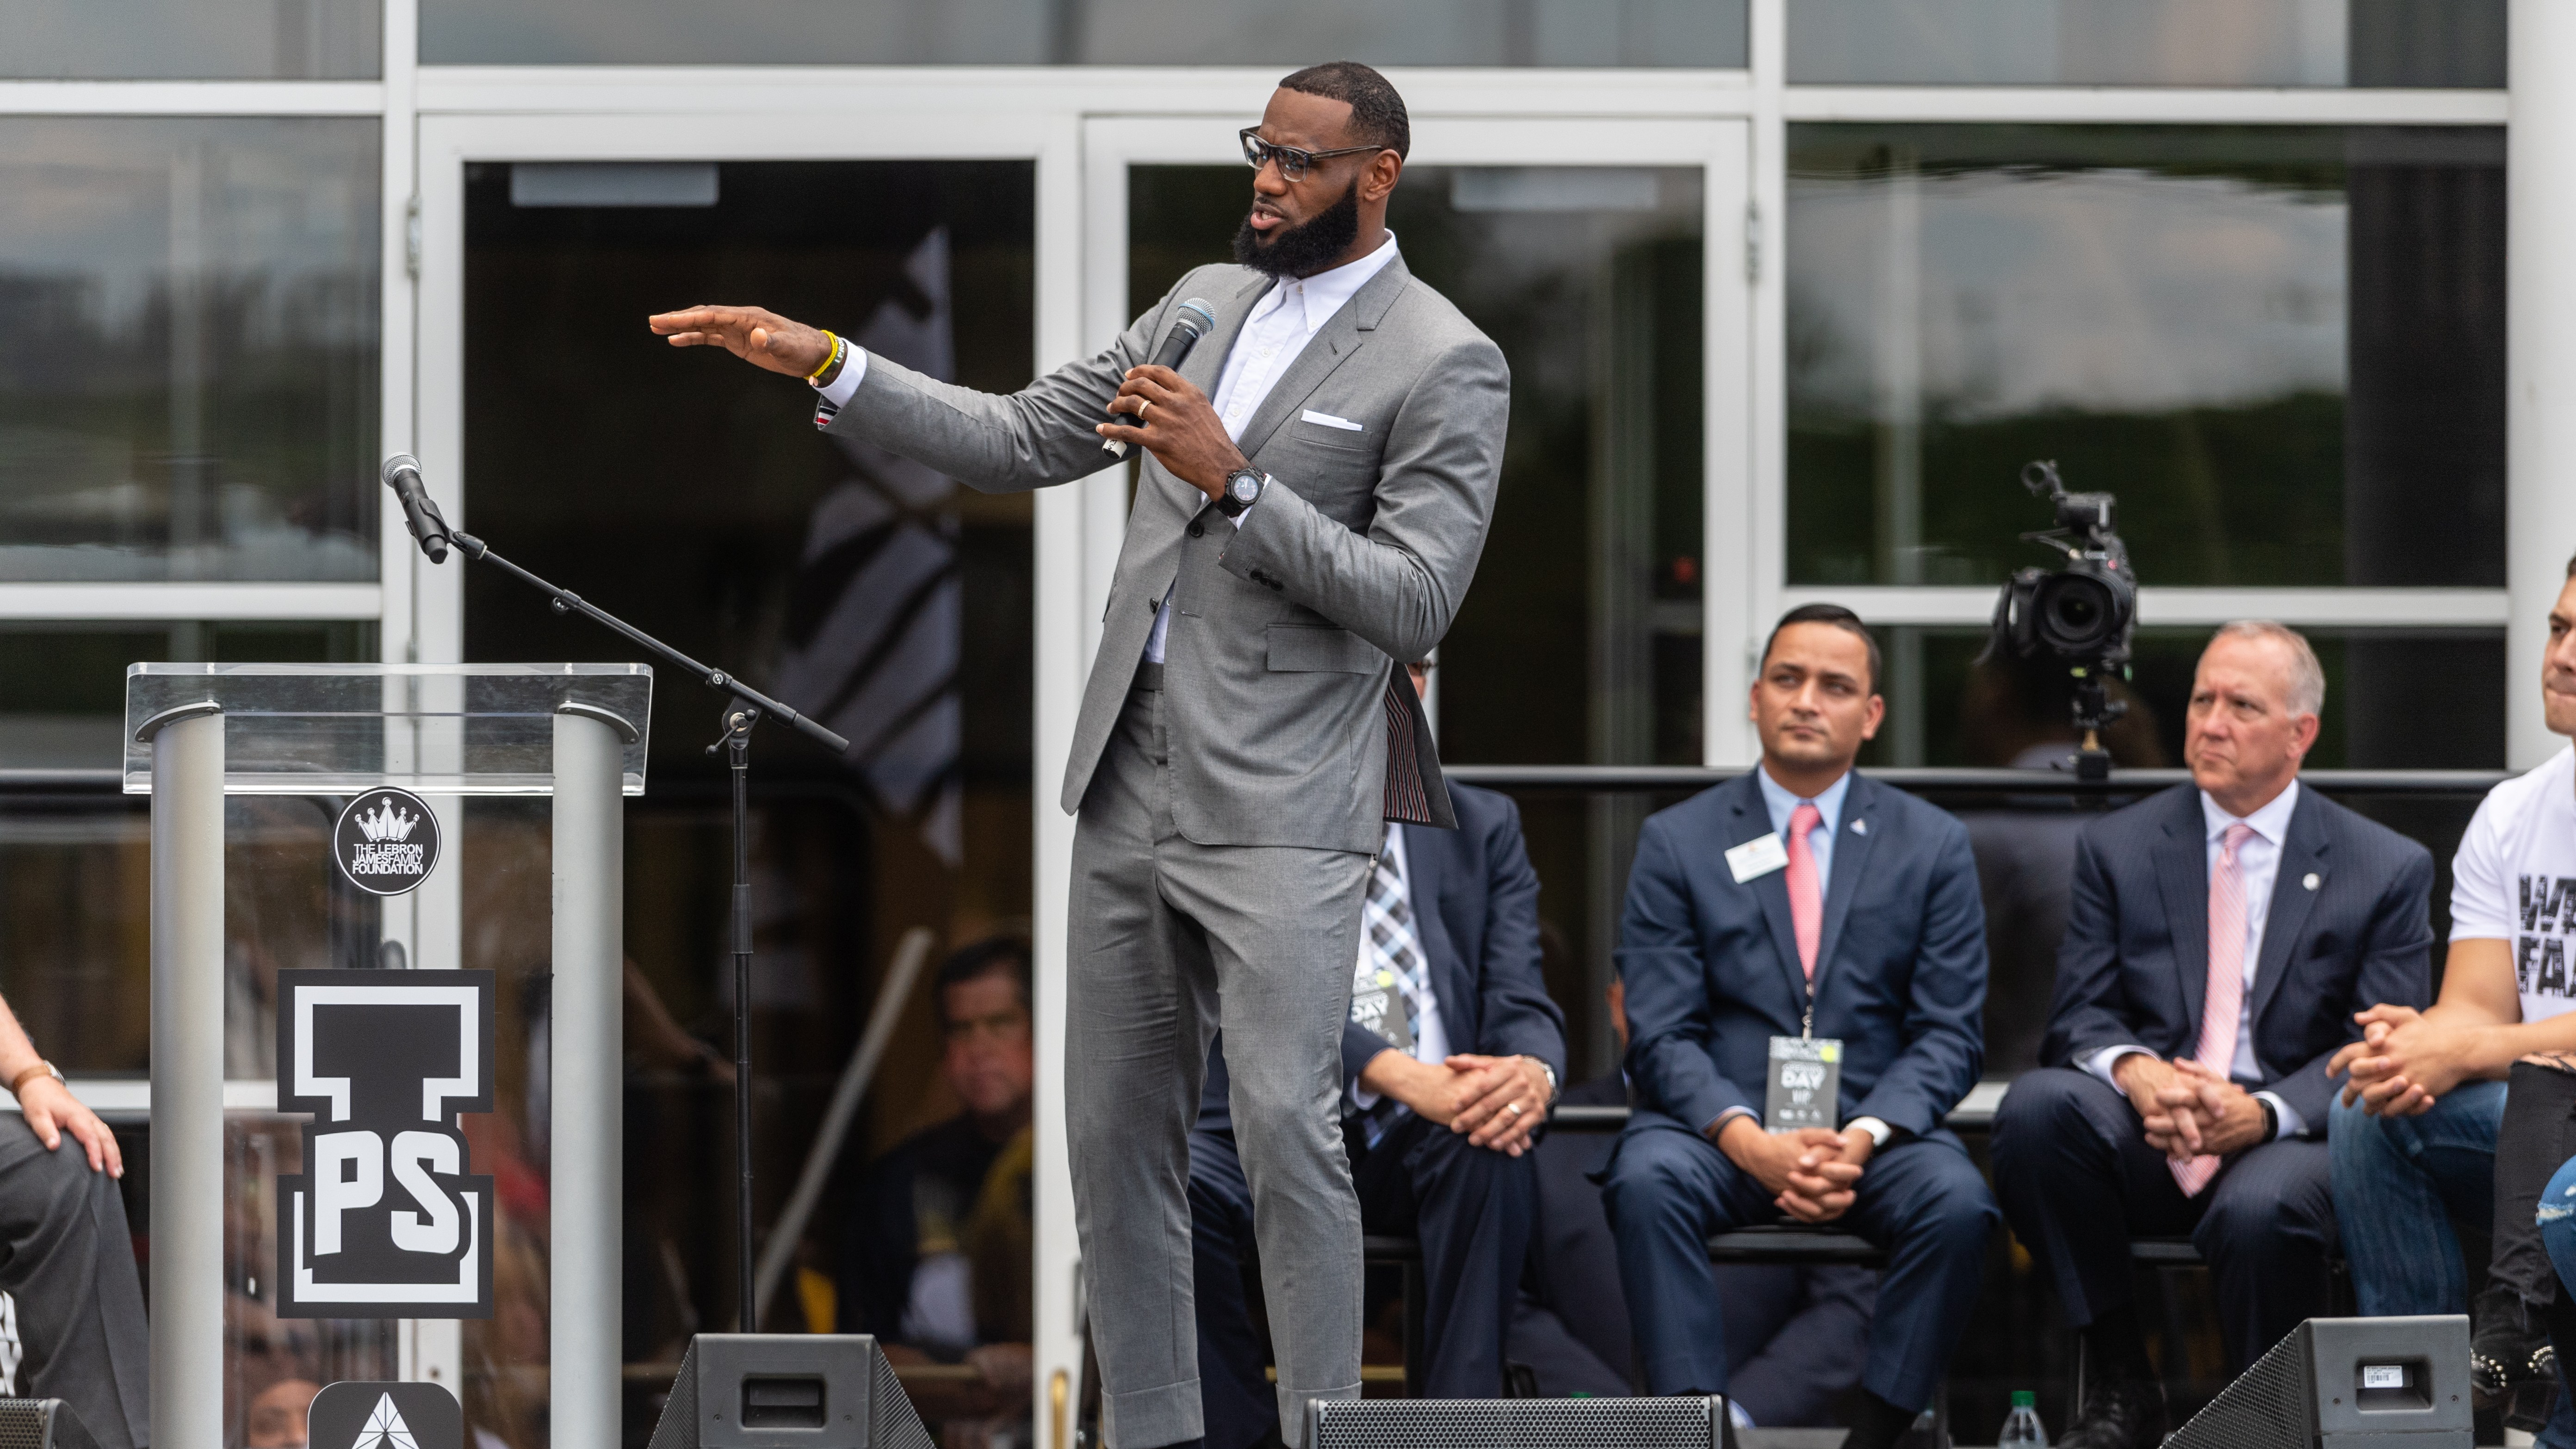 Lebron James Opened a School. Here's What You Need to Know. | Money